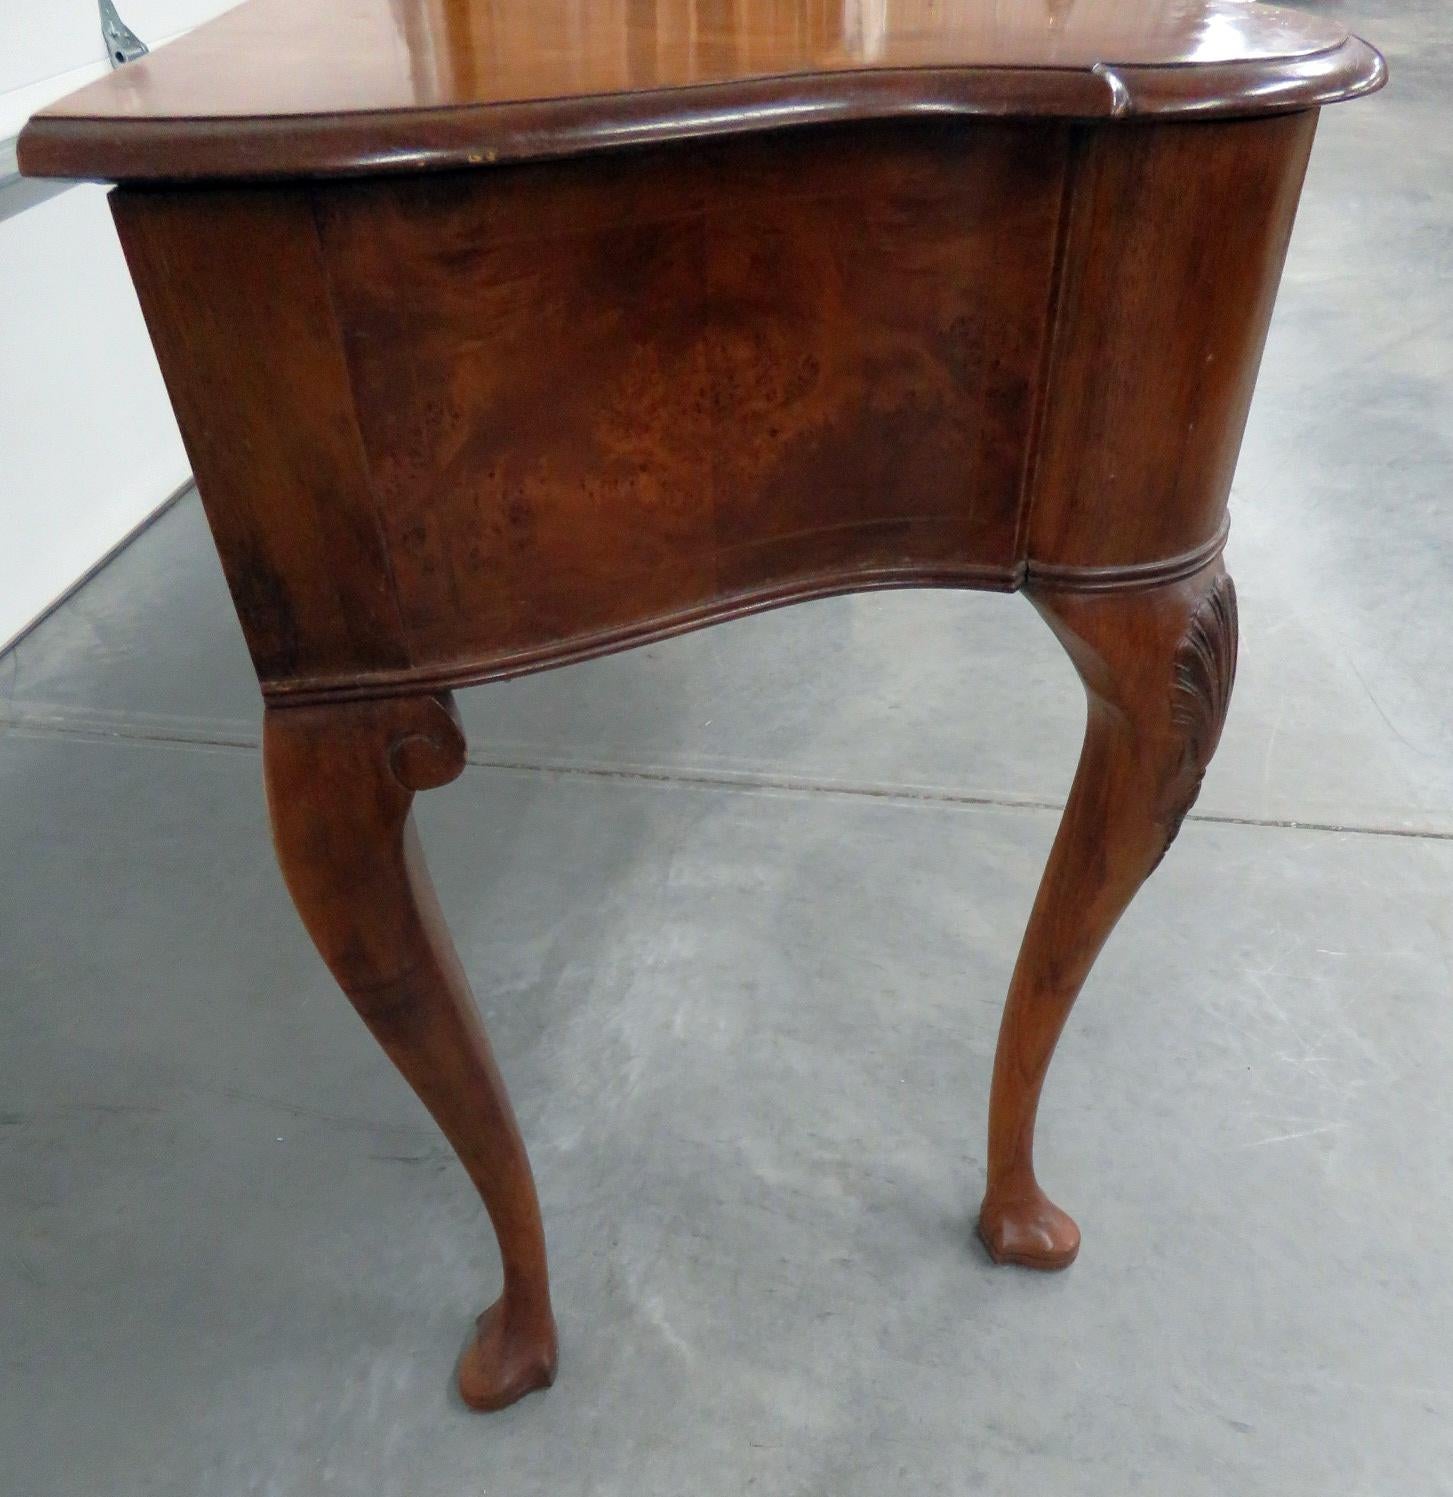 20th Century Queen Anne Style Burled Walnut Console Table